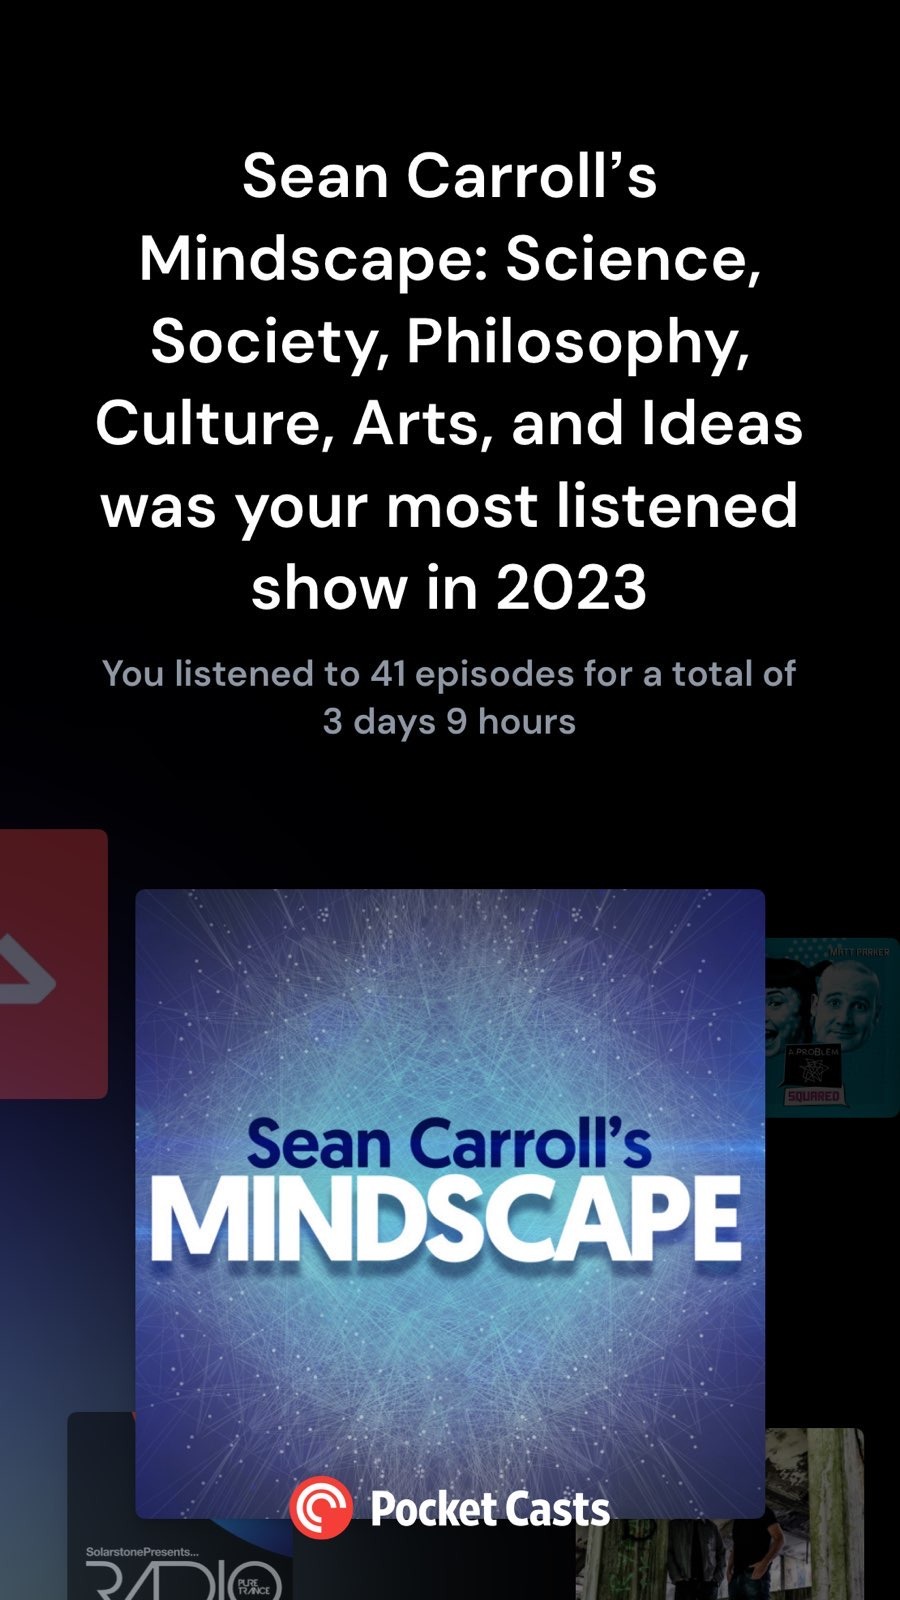 Sean Carroll's Mindscape: Science, Society, Philosophy, Culture, Arts and Ideas was your most listened show in 2023.

You listened to 41 episodes for a total of 3 days 9 hours